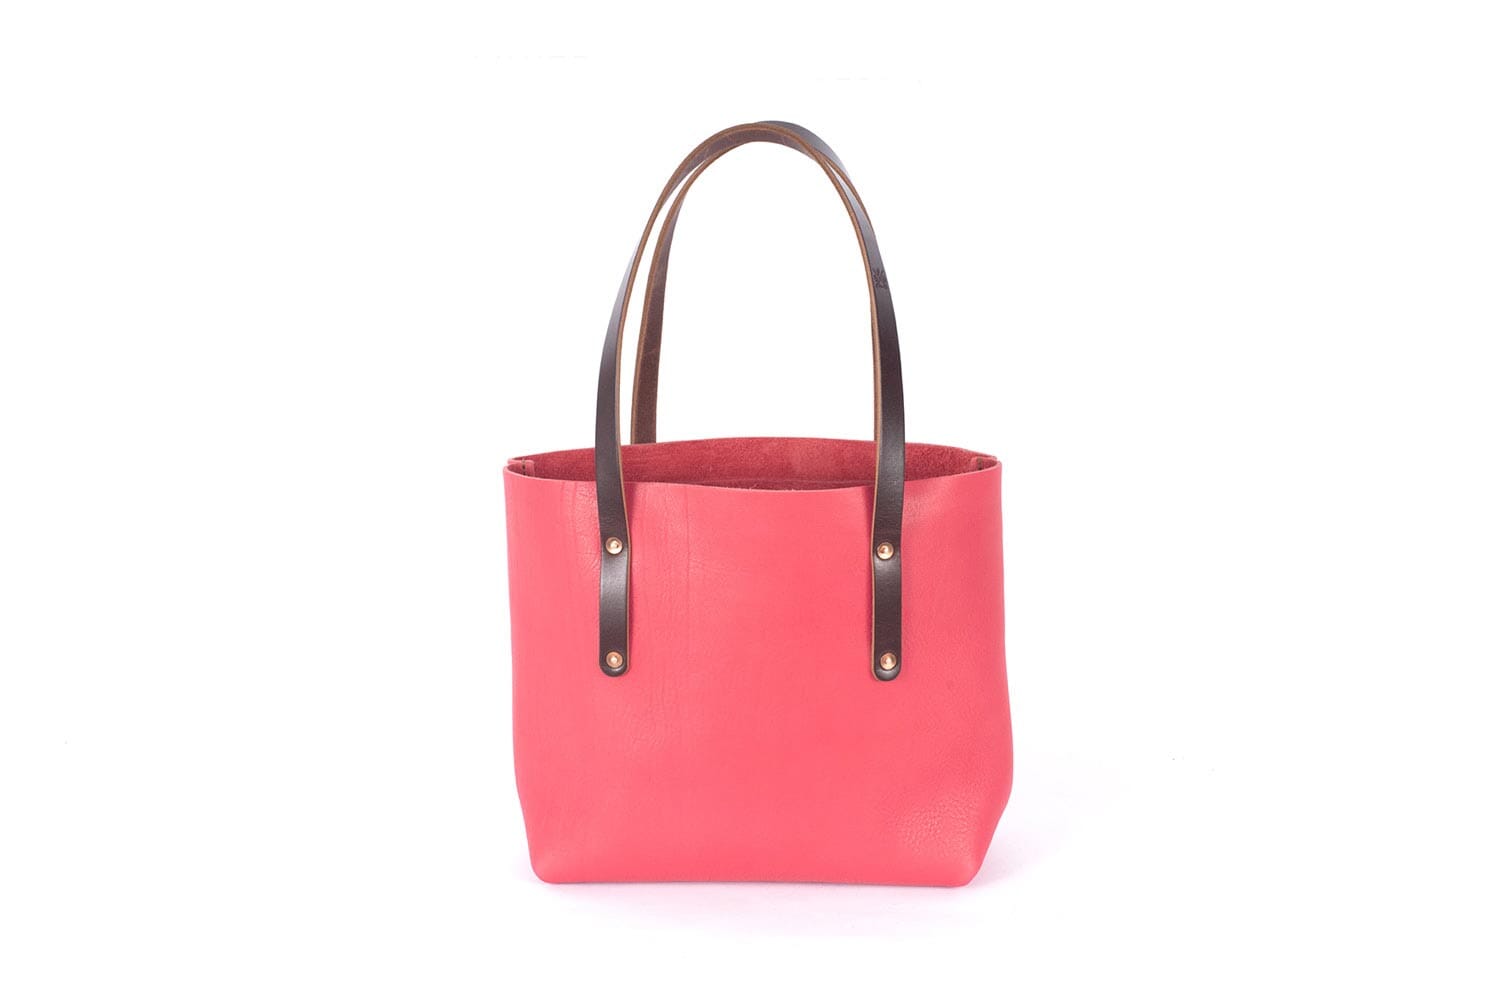 AVERY LEATHER TOTE BAG - MEDIUM - PINK